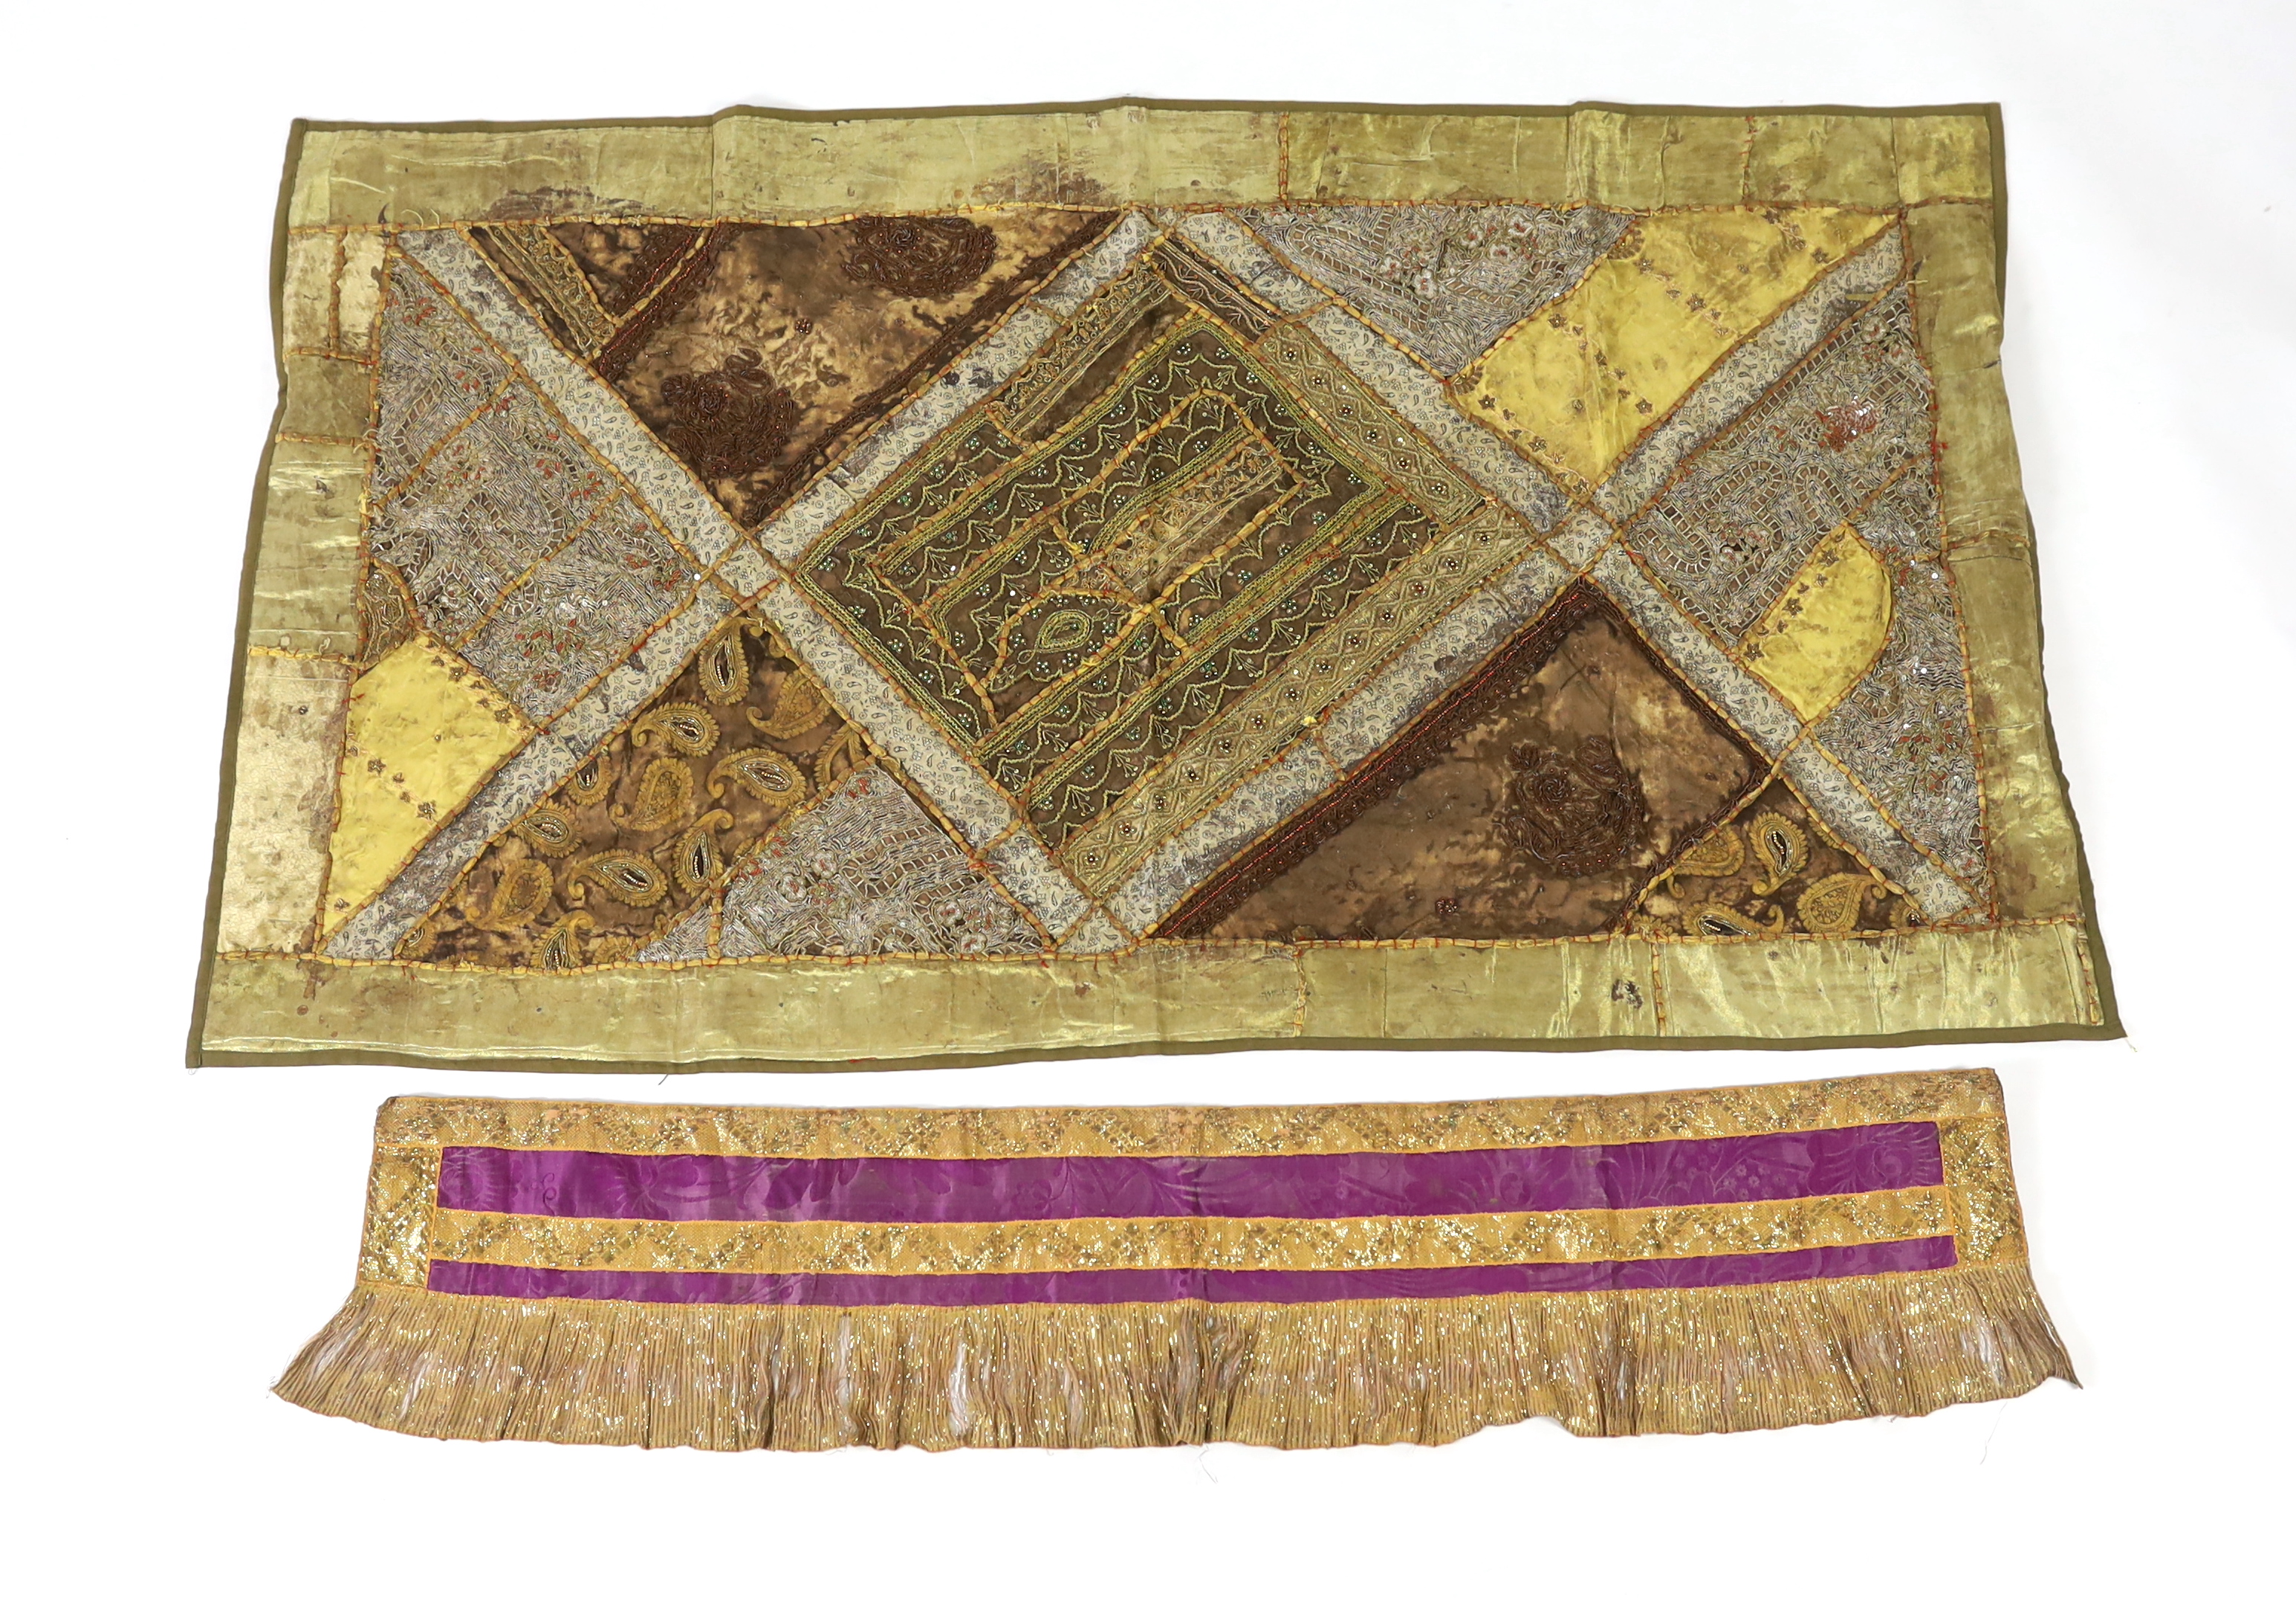 A 20th century Indian patchwork hanging, designed in golds and browns using patchwork batik, beadwork and metallic embroidery, each bordered with thick silk strands bound together, the hanging then bordered with gold met